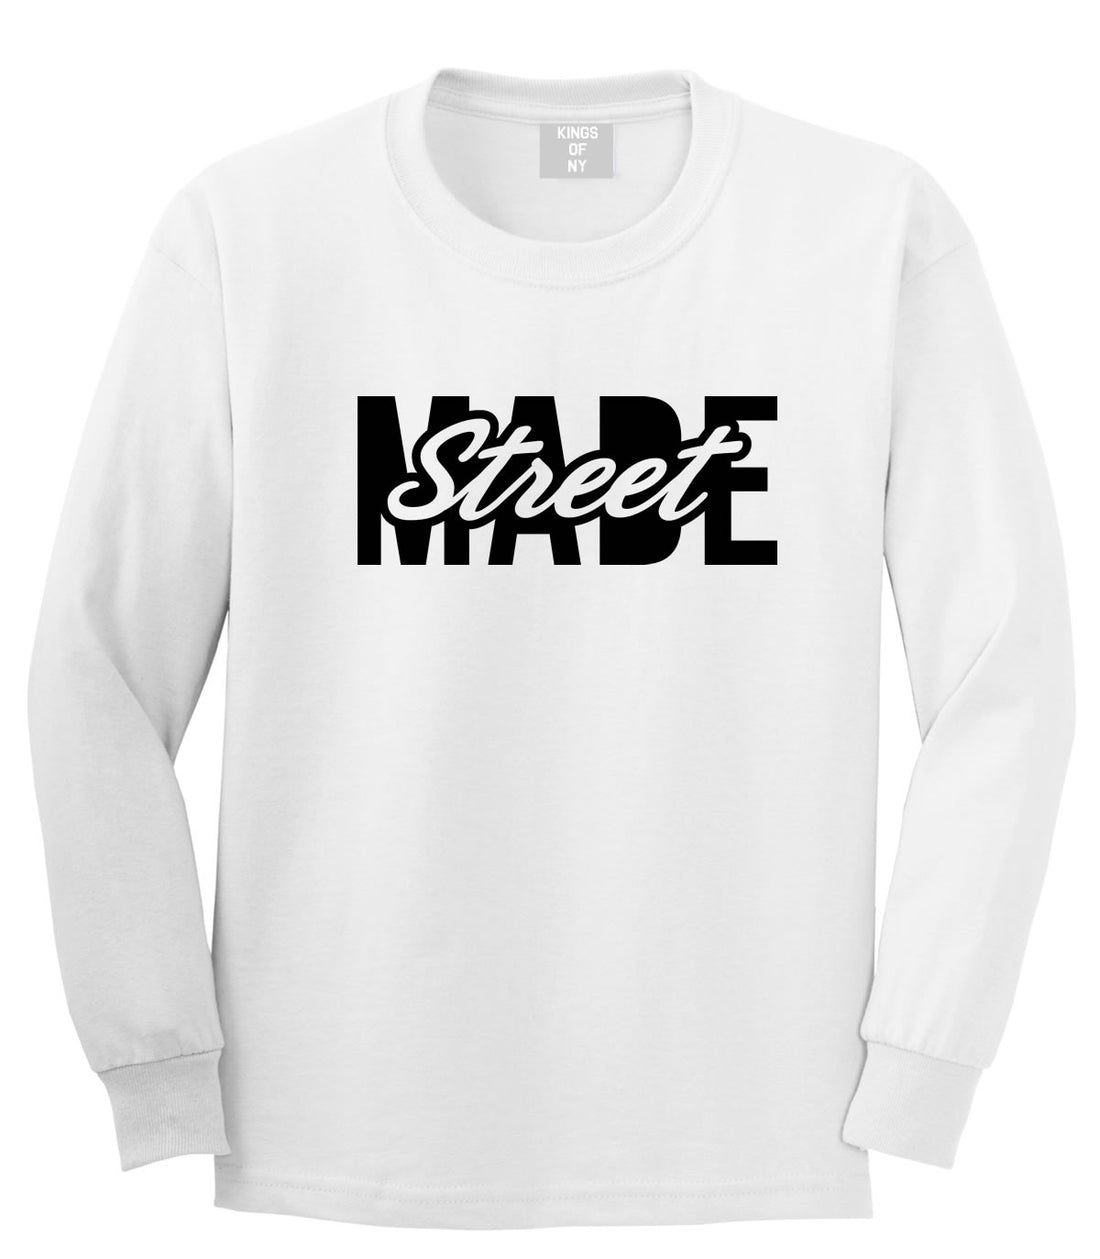 Kings Of NY Street Made Long Sleeve T-Shirt in White